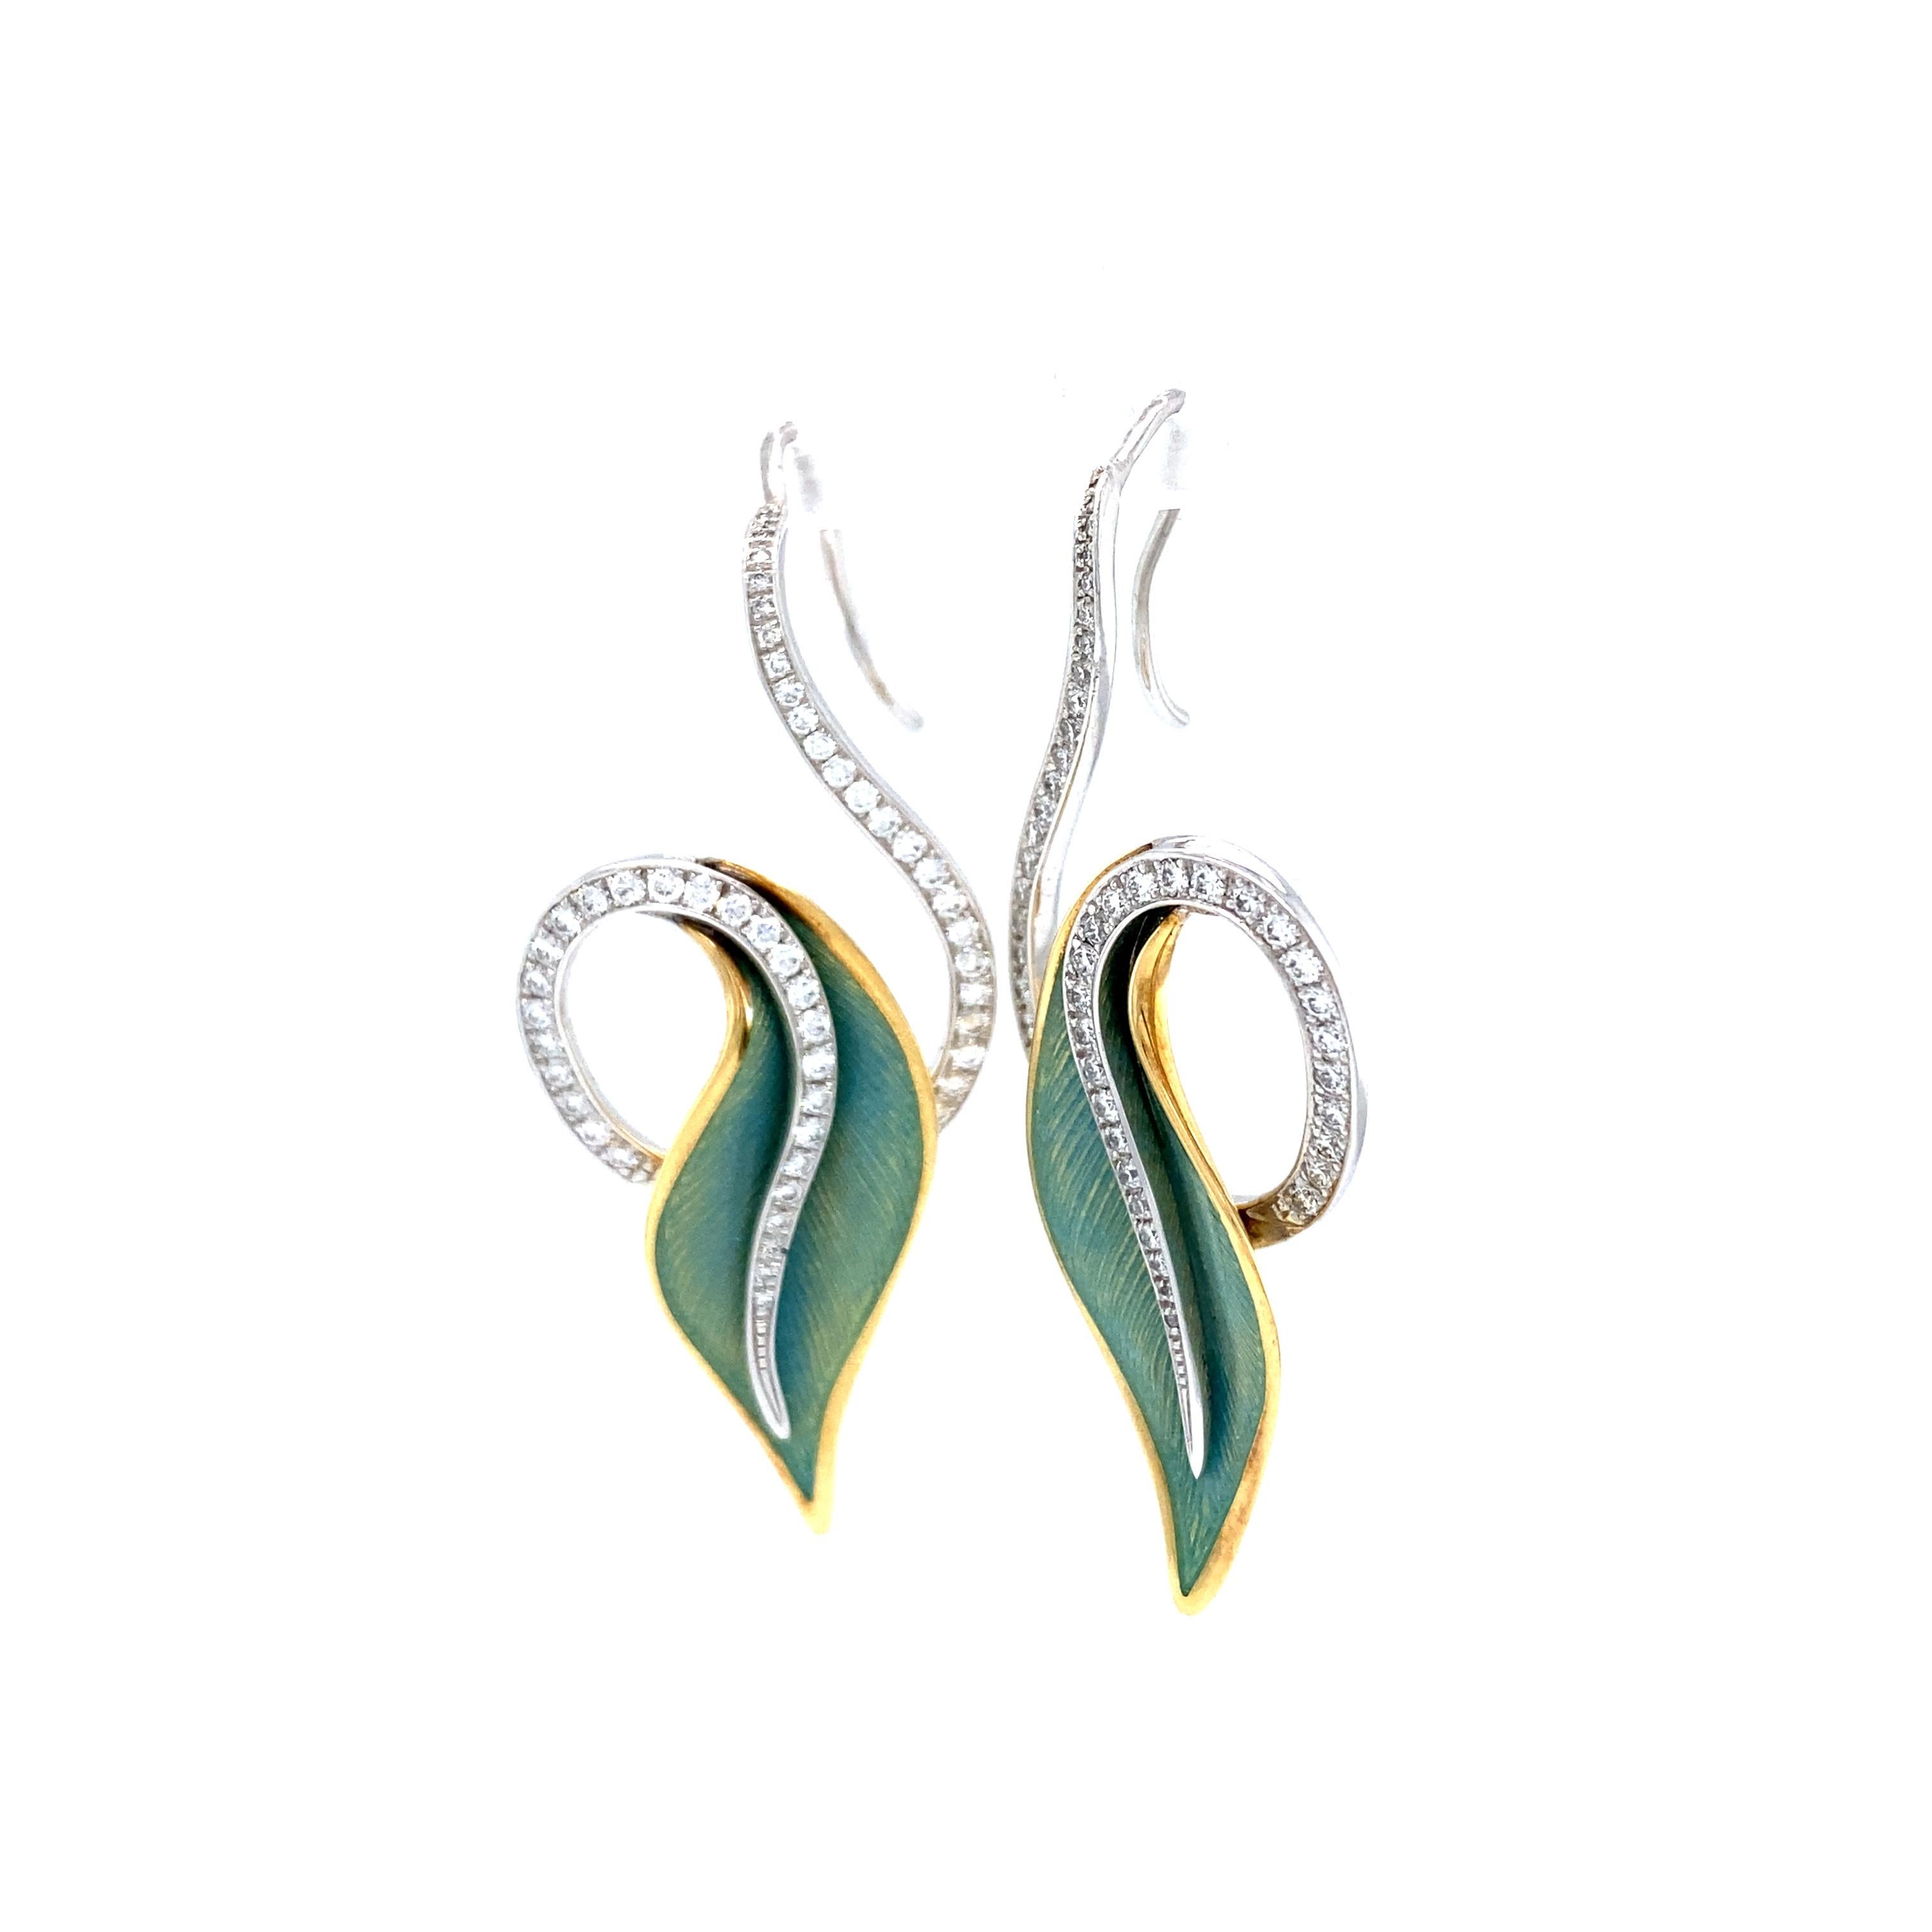 Contemporary Leave Earrings 18k White Gold/Yellow Gold Turquoise Enamel 102 Diamonds 0.86 Ct For Sale